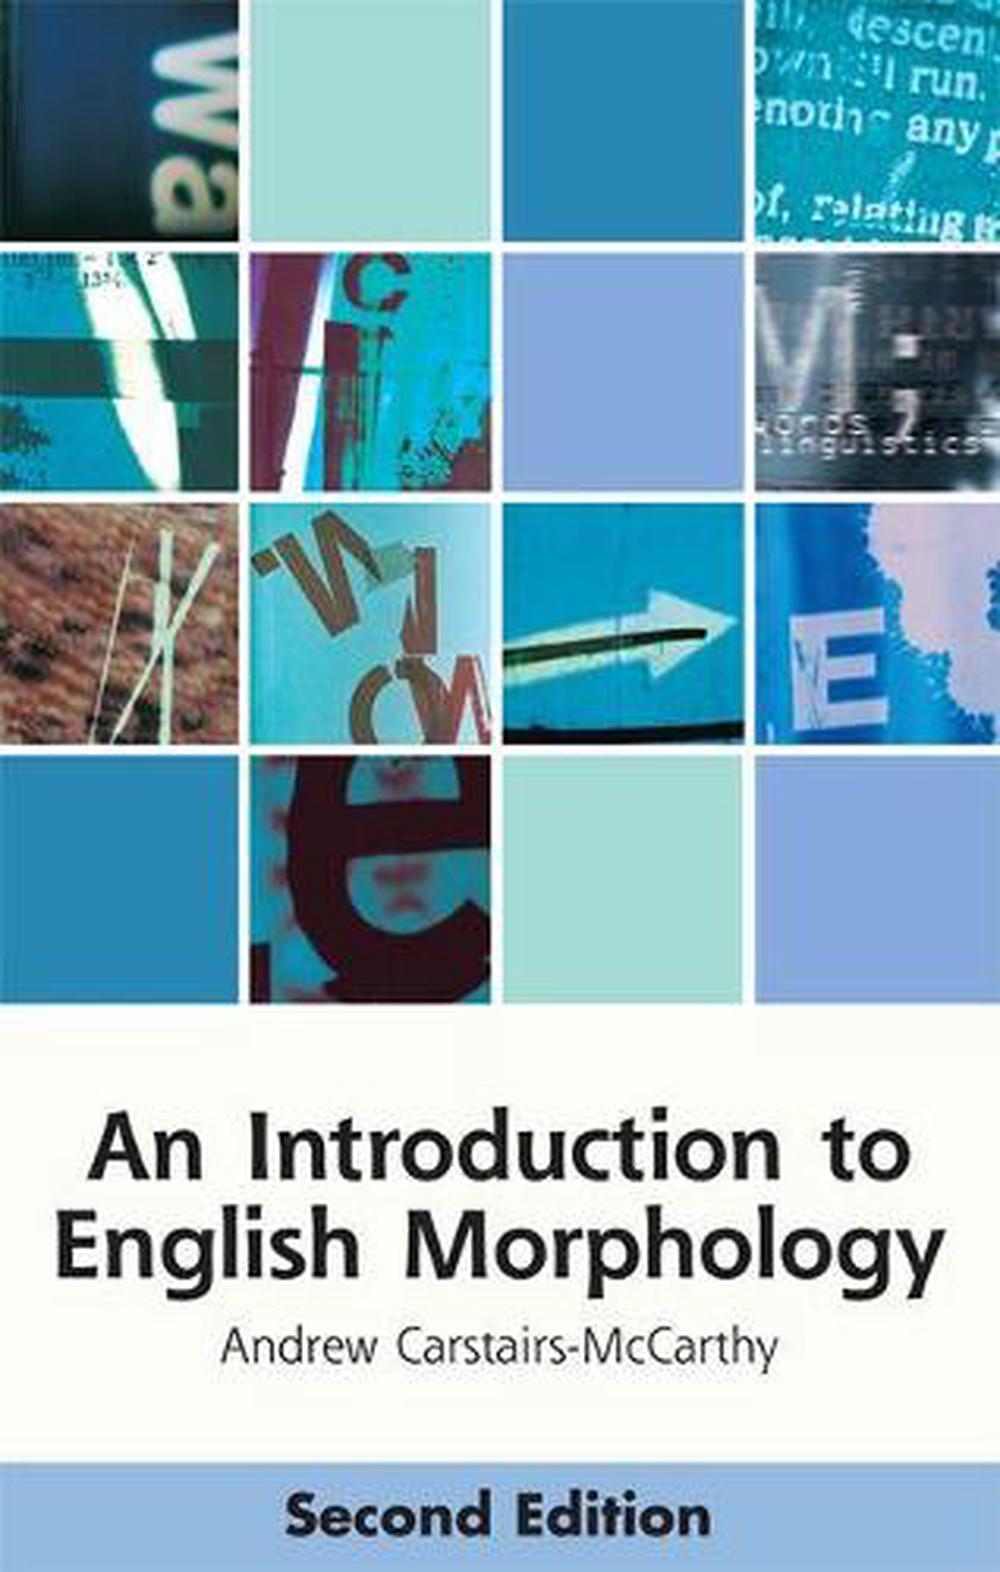 research topics in english morphology